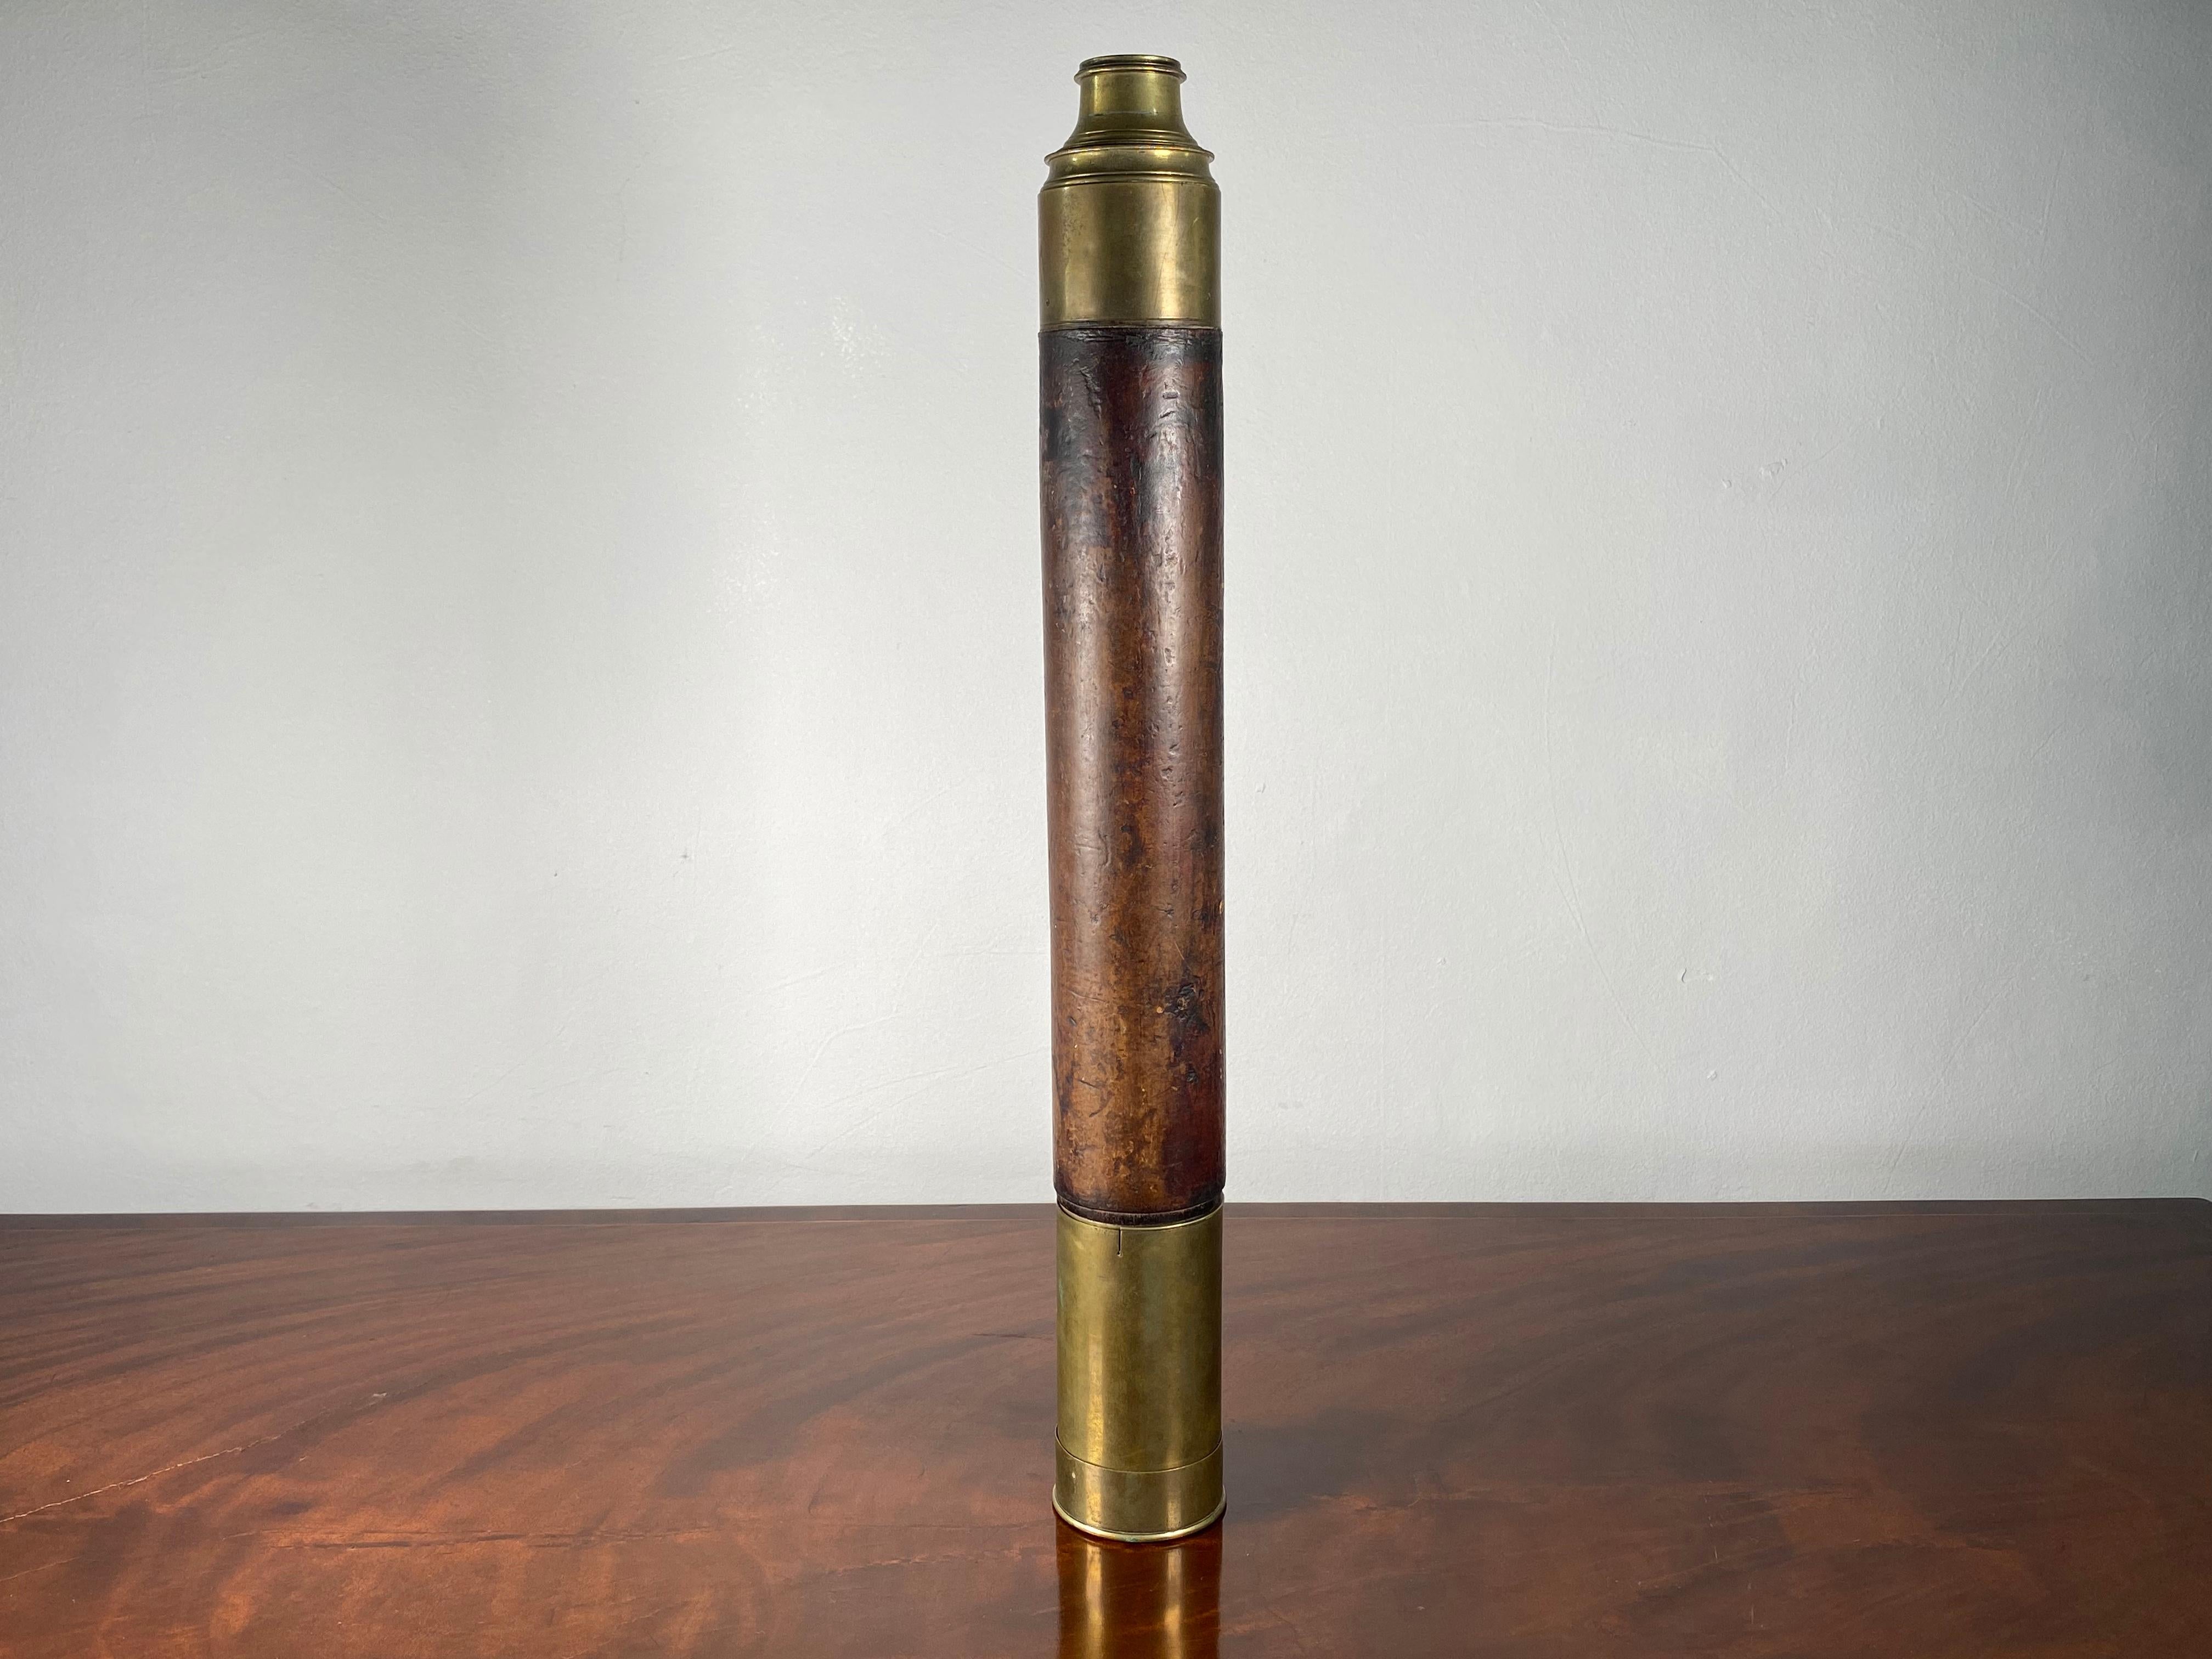 A beautiful leather-bound brass telescope dating from the early 19th century, although the large lens as a chip to the edge of the lens this does not seem to affect it functioning very well as a telescope.